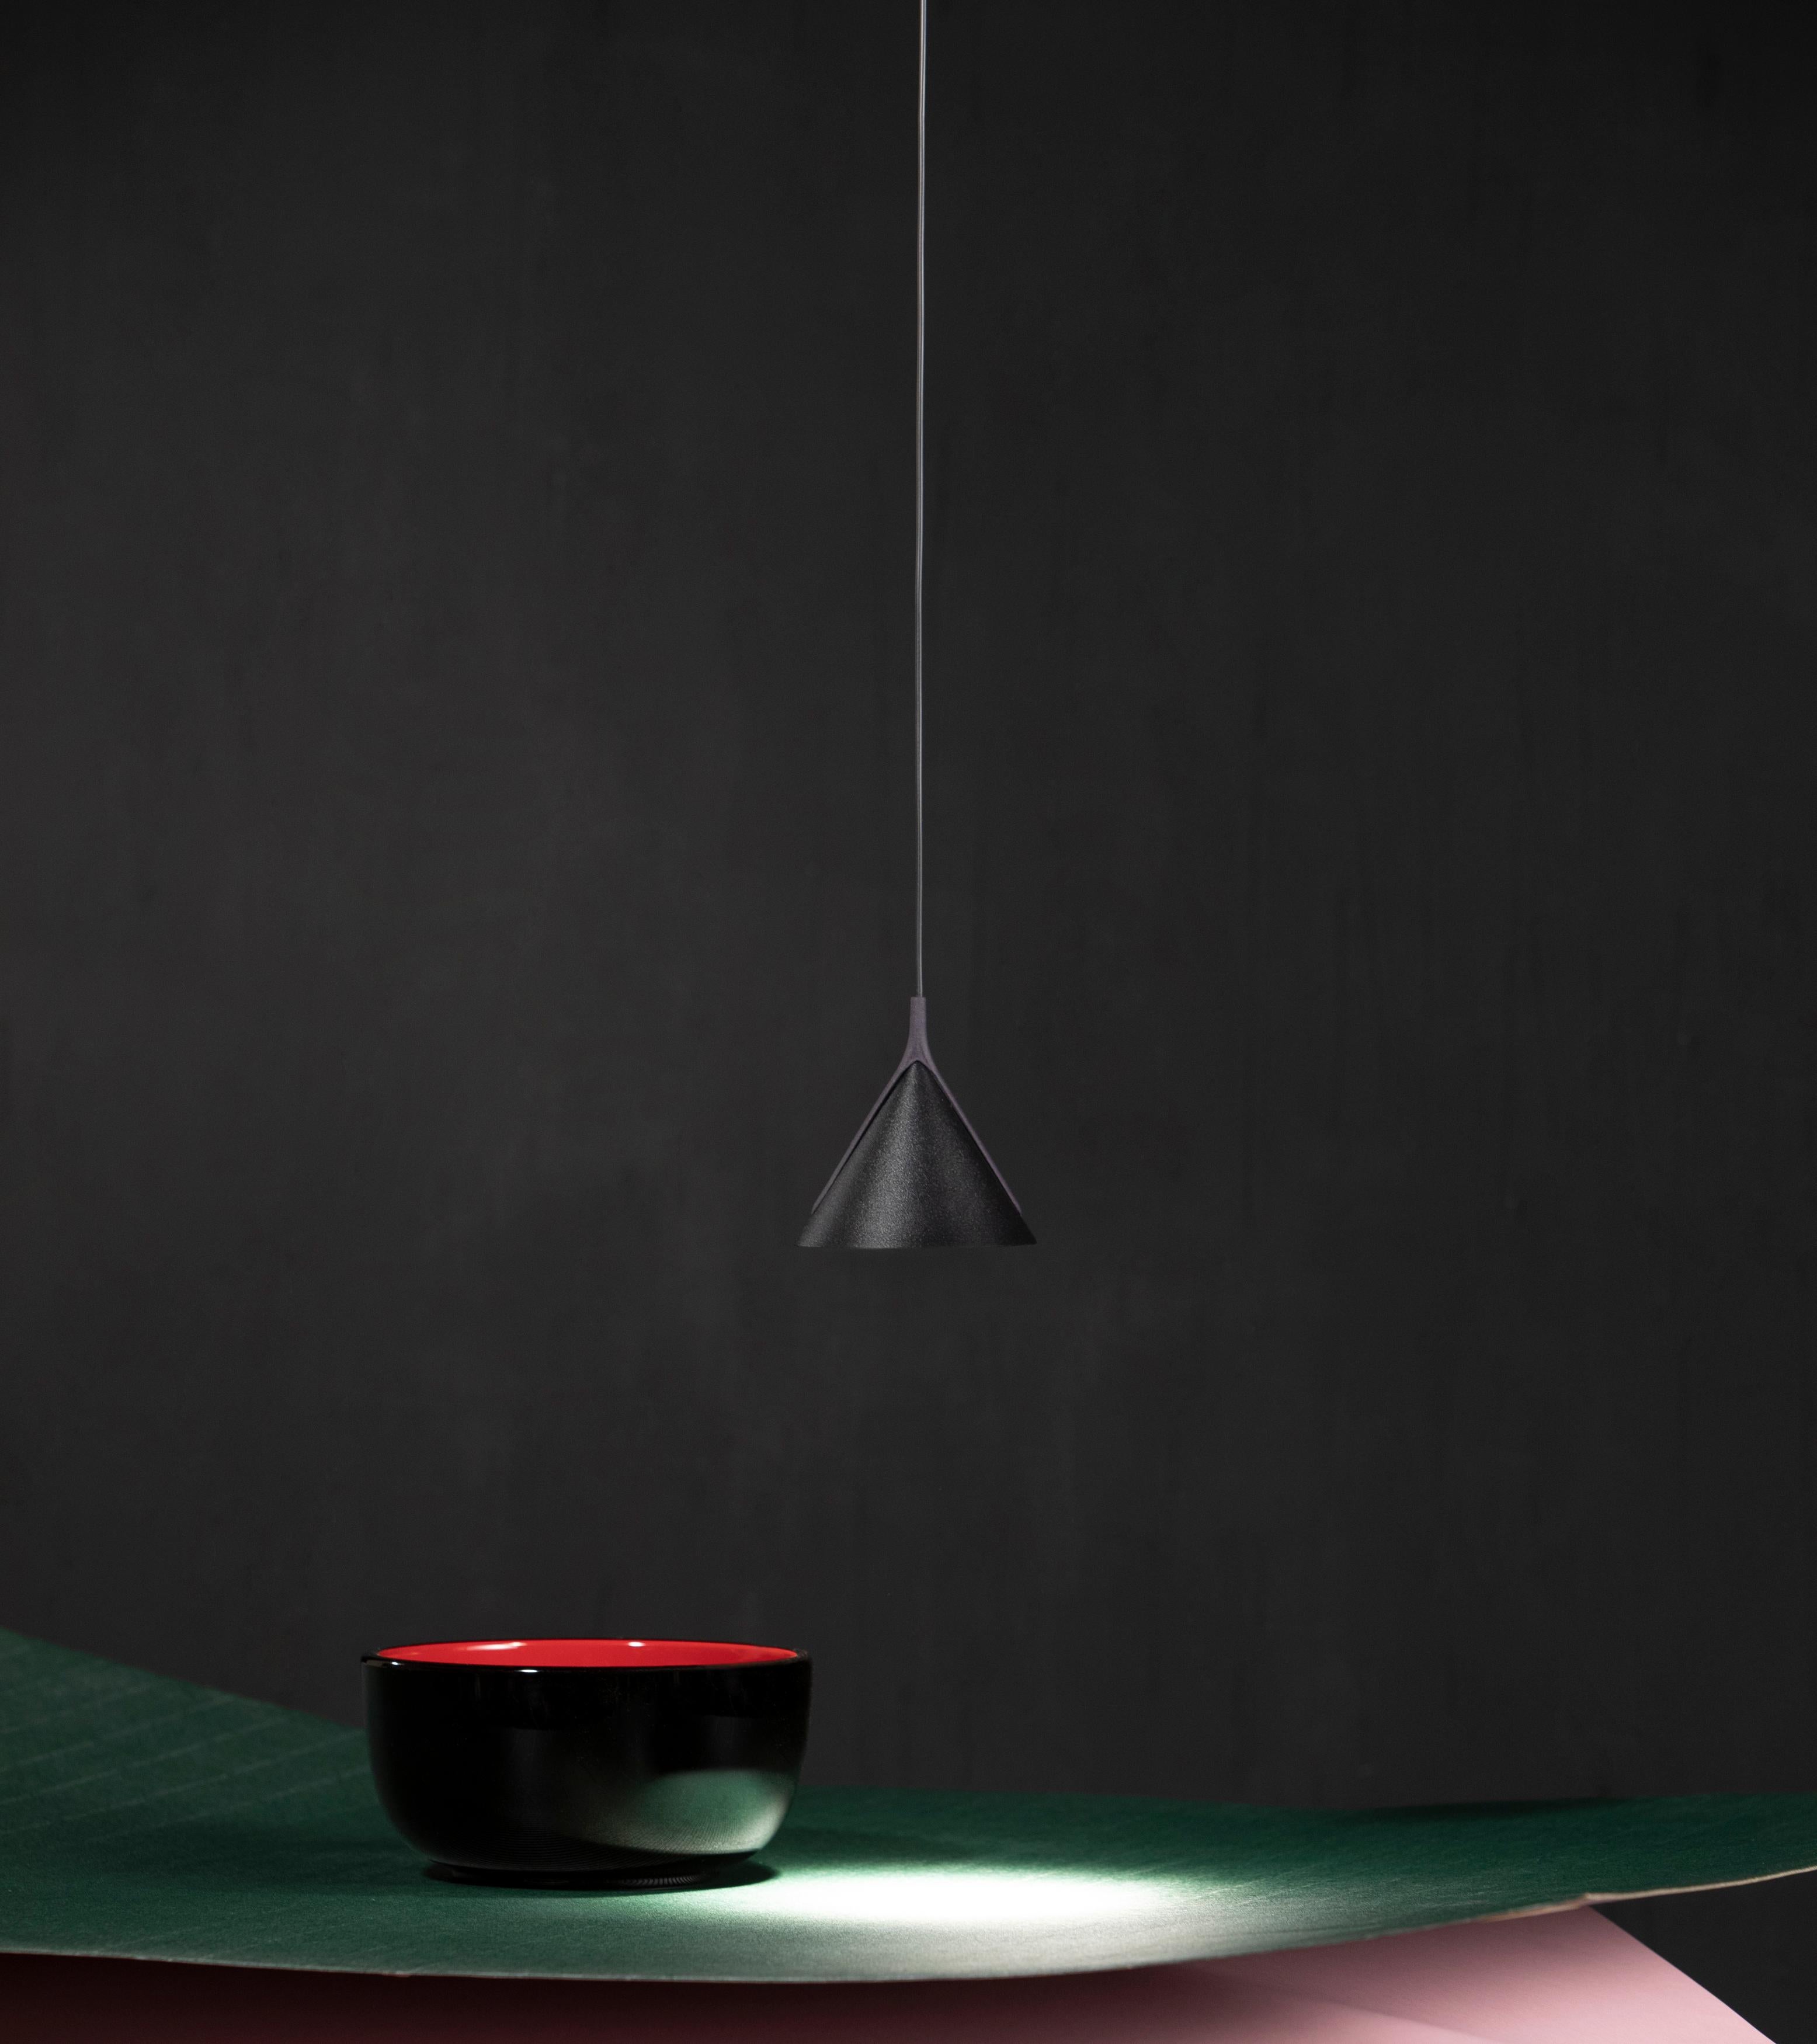 Aluminum Axolight Jewel Mono Small Pendant Light in Greige with Black Finish by Yonoh For Sale